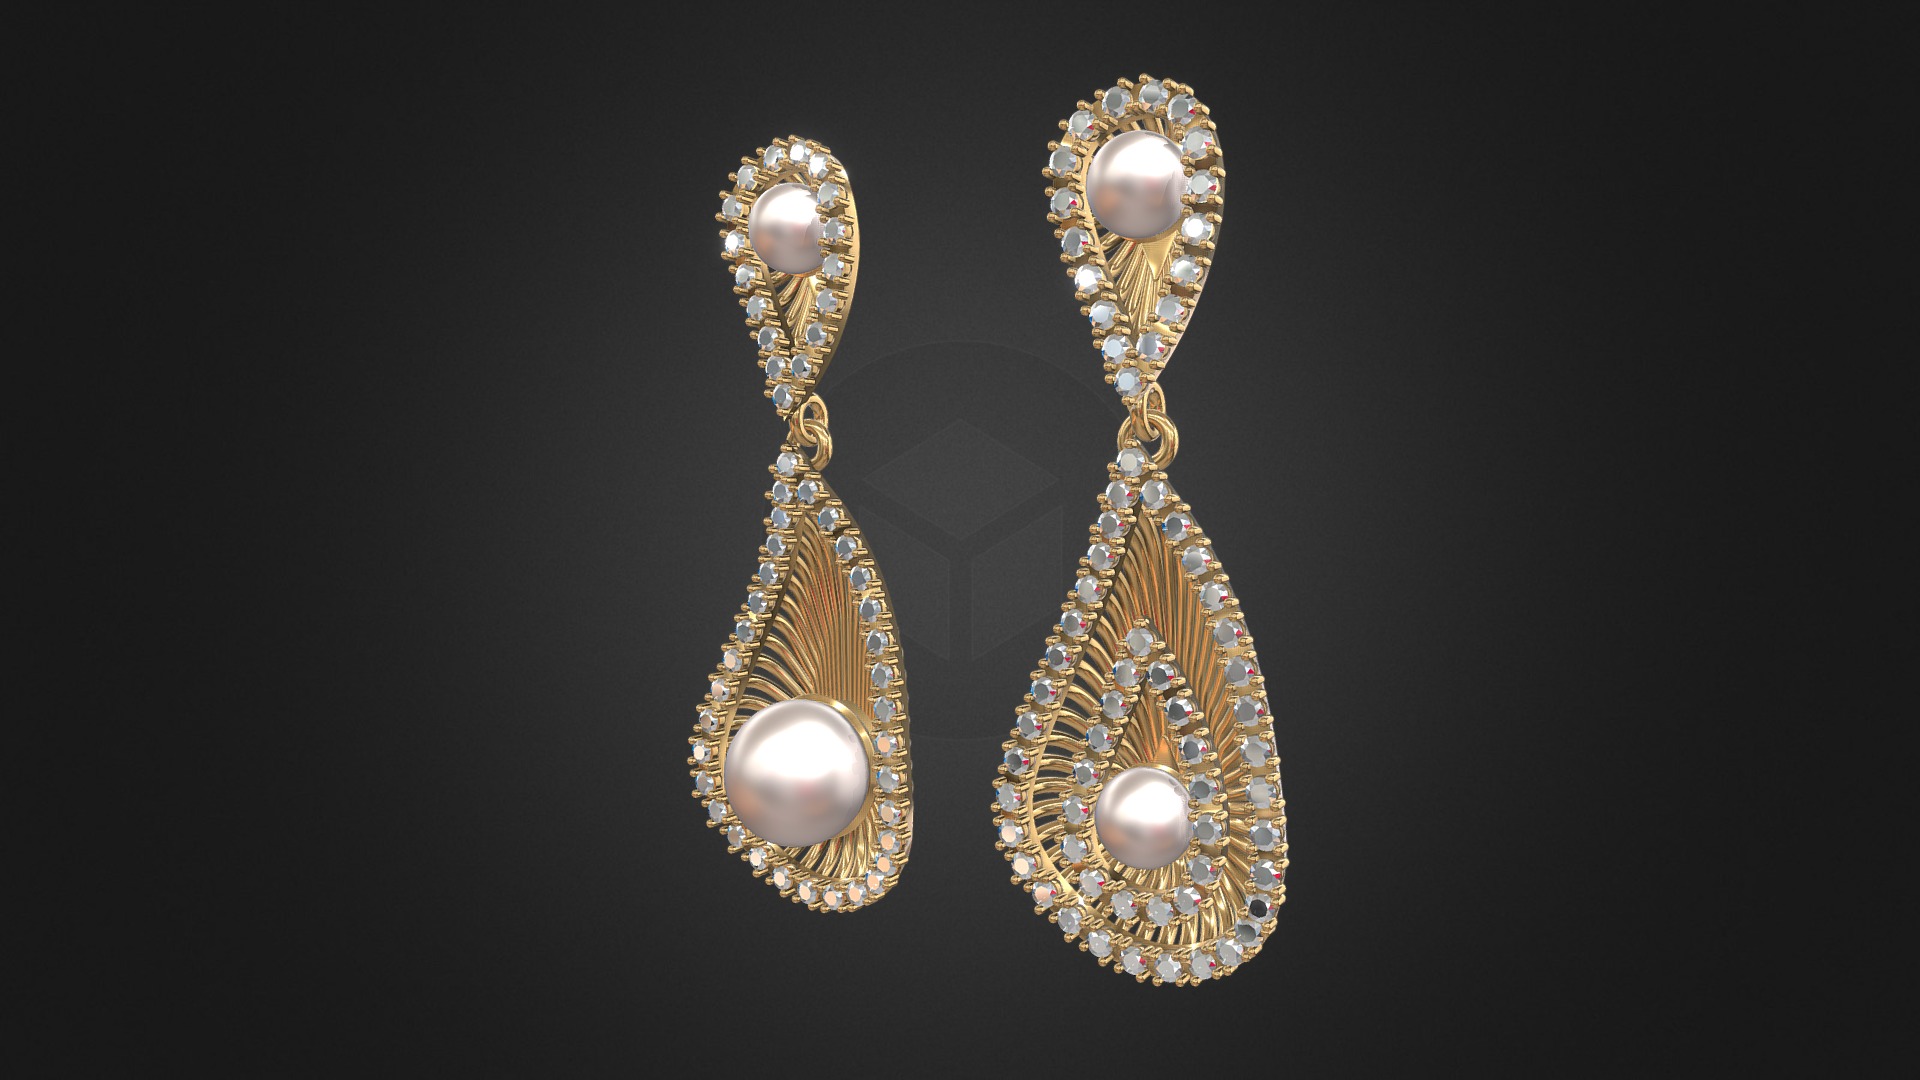 3D model 1027 – Earrings - This is a 3D model of the 1027 - Earrings. The 3D model is about a pair of gold earrings.